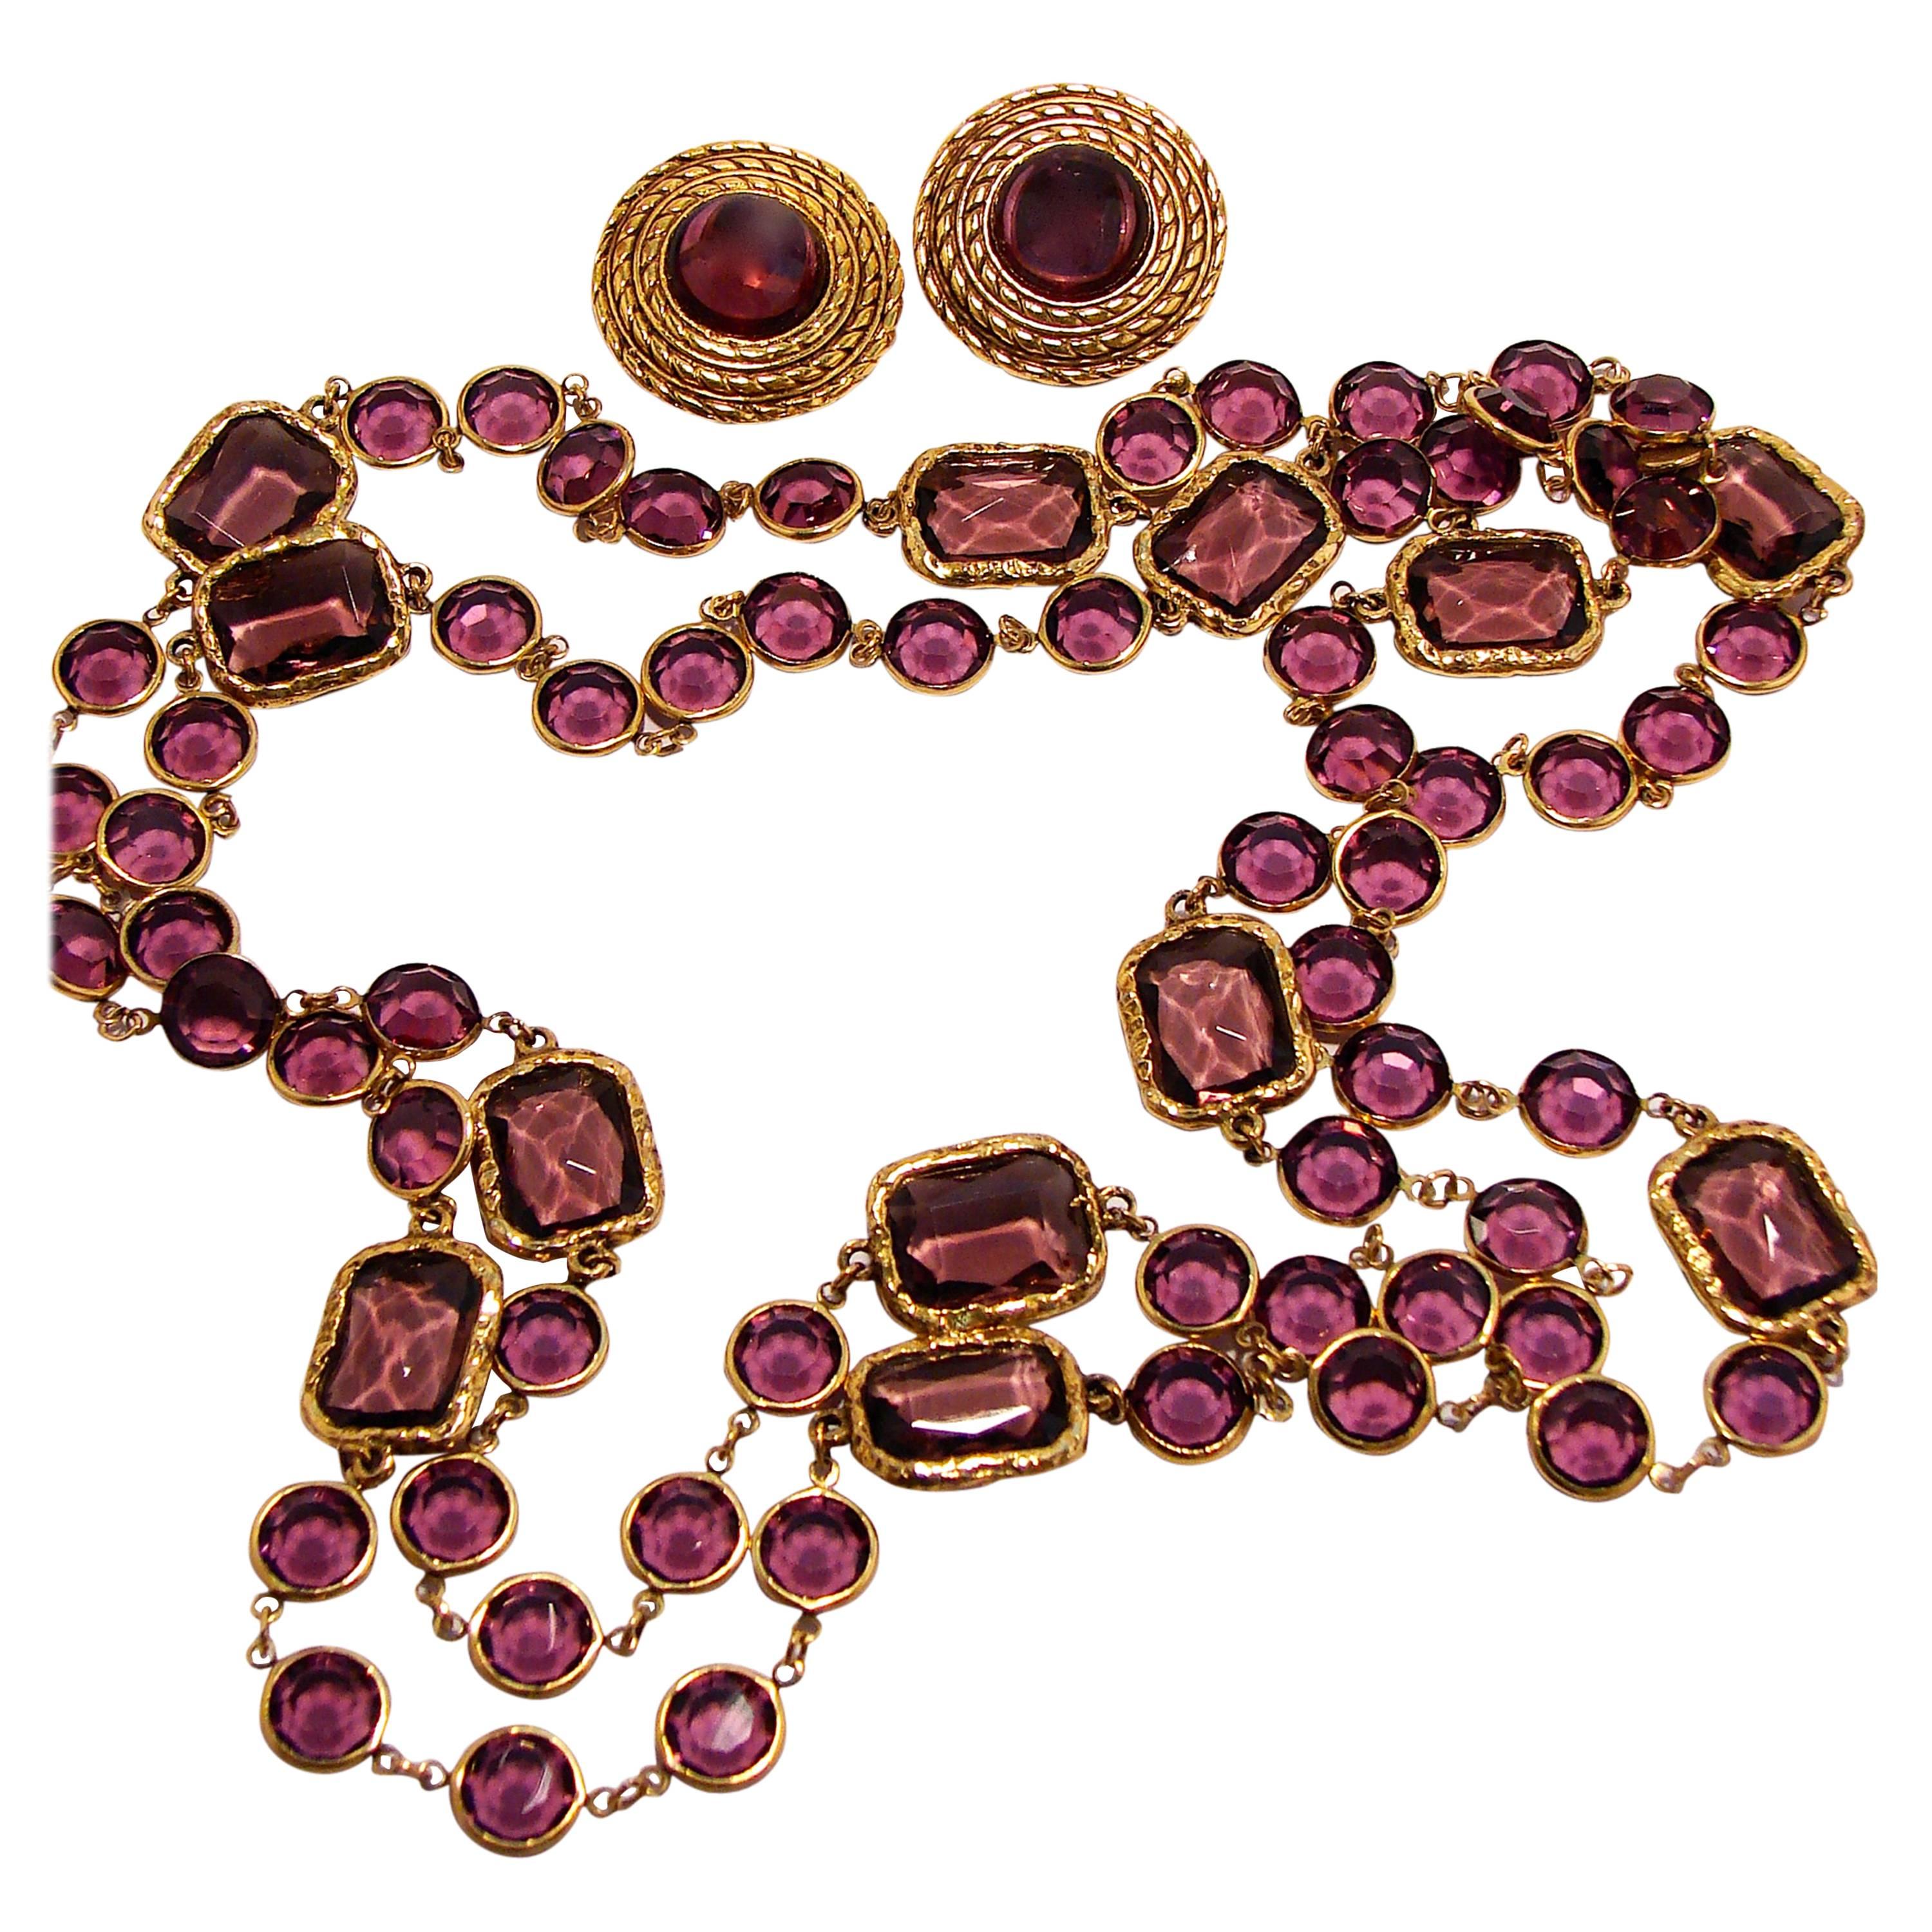 Chanel Amethyst Sautoir Necklace with Matching Earrings Set, 1981